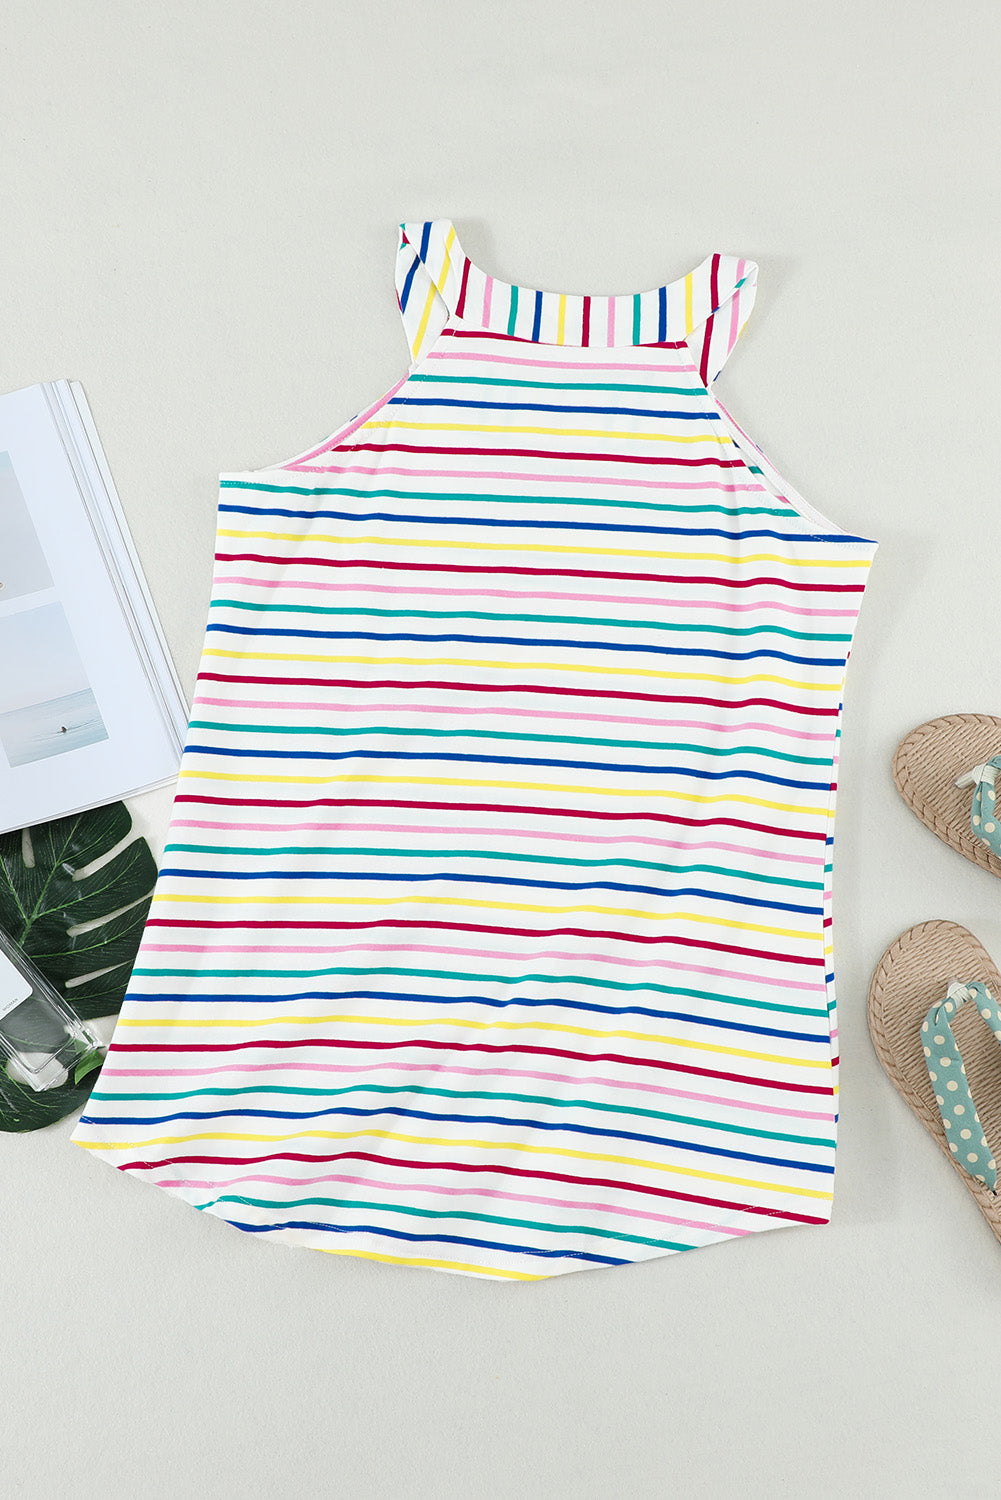 Cute Colorful Striped Halter Summer Tank Top